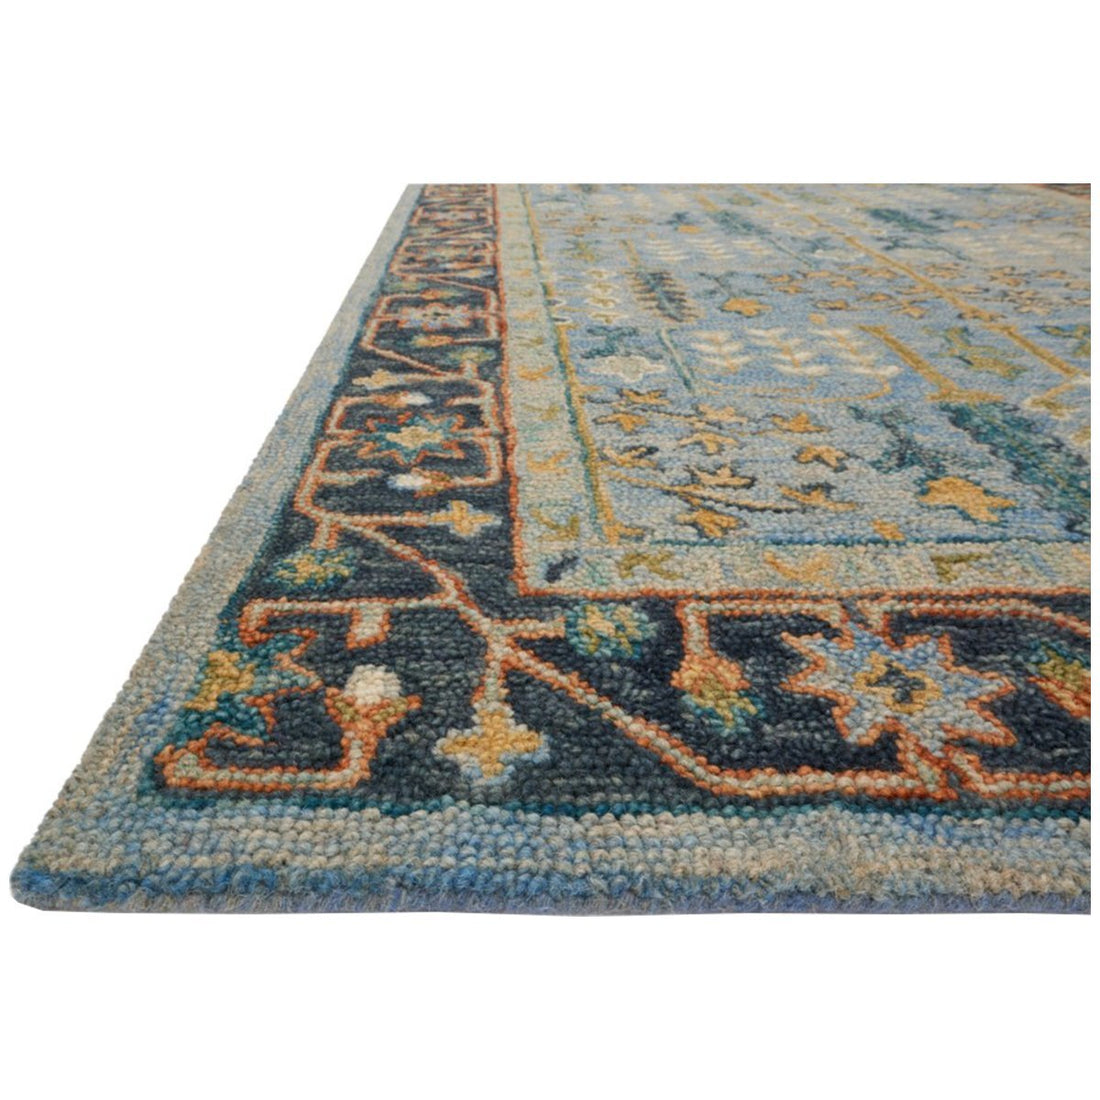 Loloi Victoria VK-12 Hooked Rug